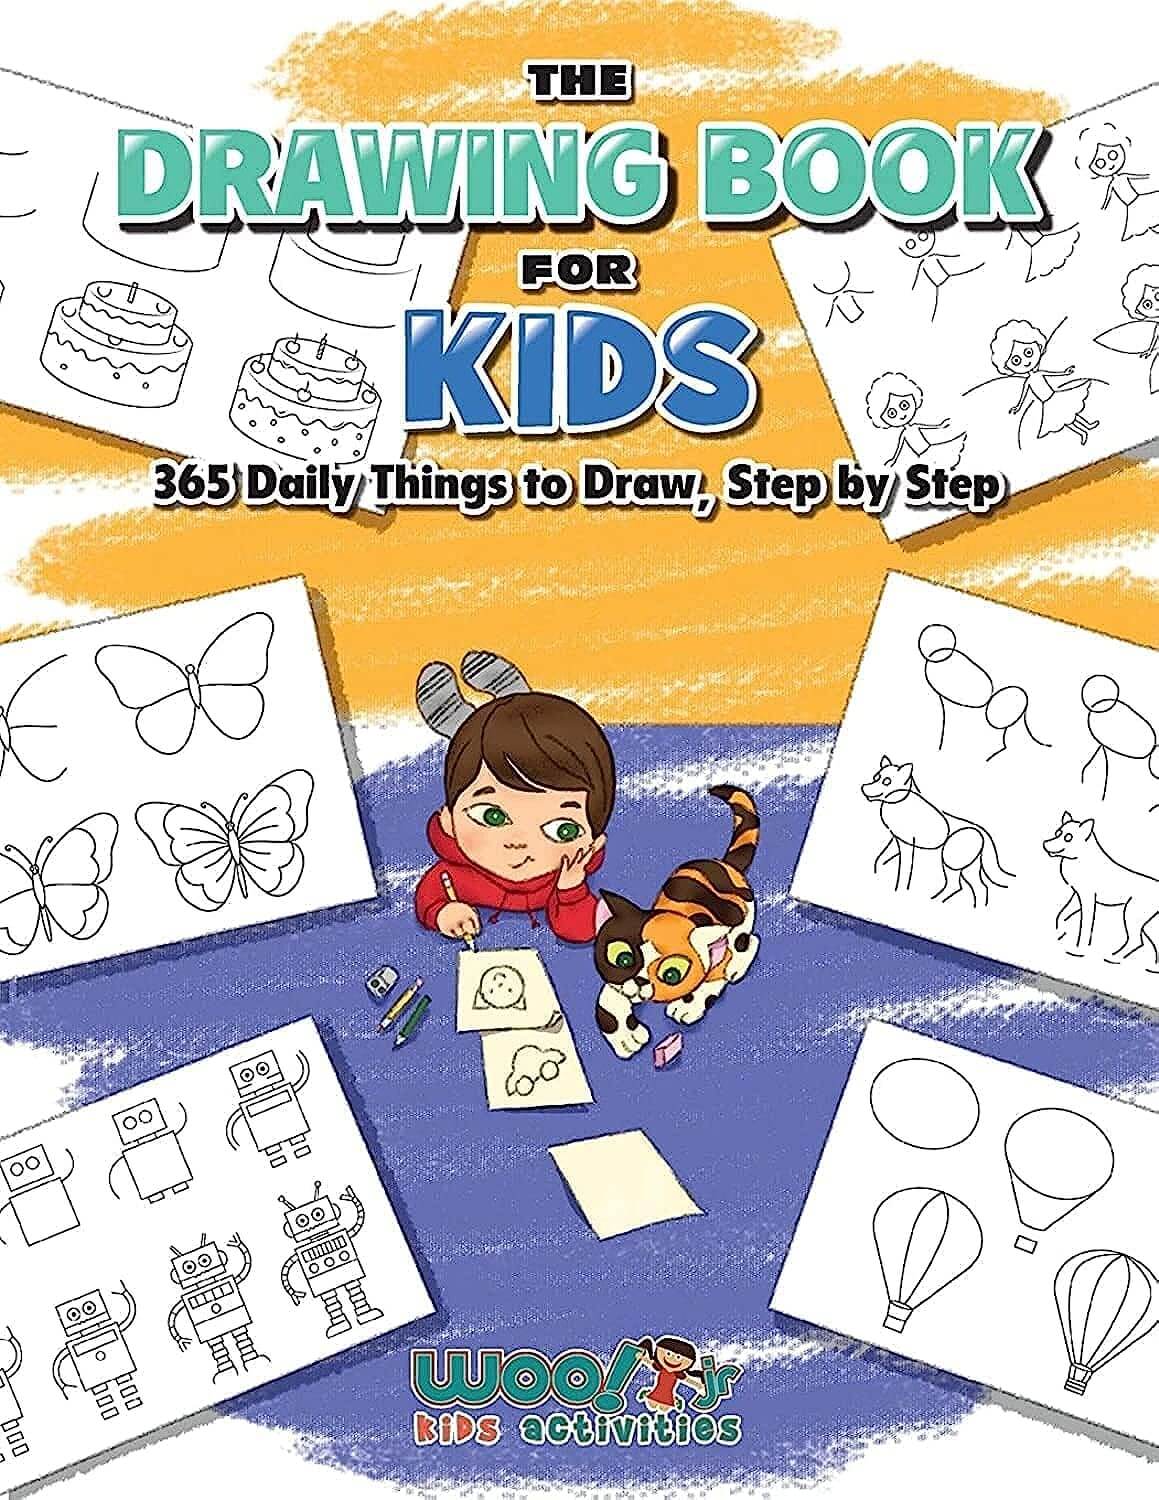 Cover art for the book The Drawing Book for Kids 365 Daily Things to Draw